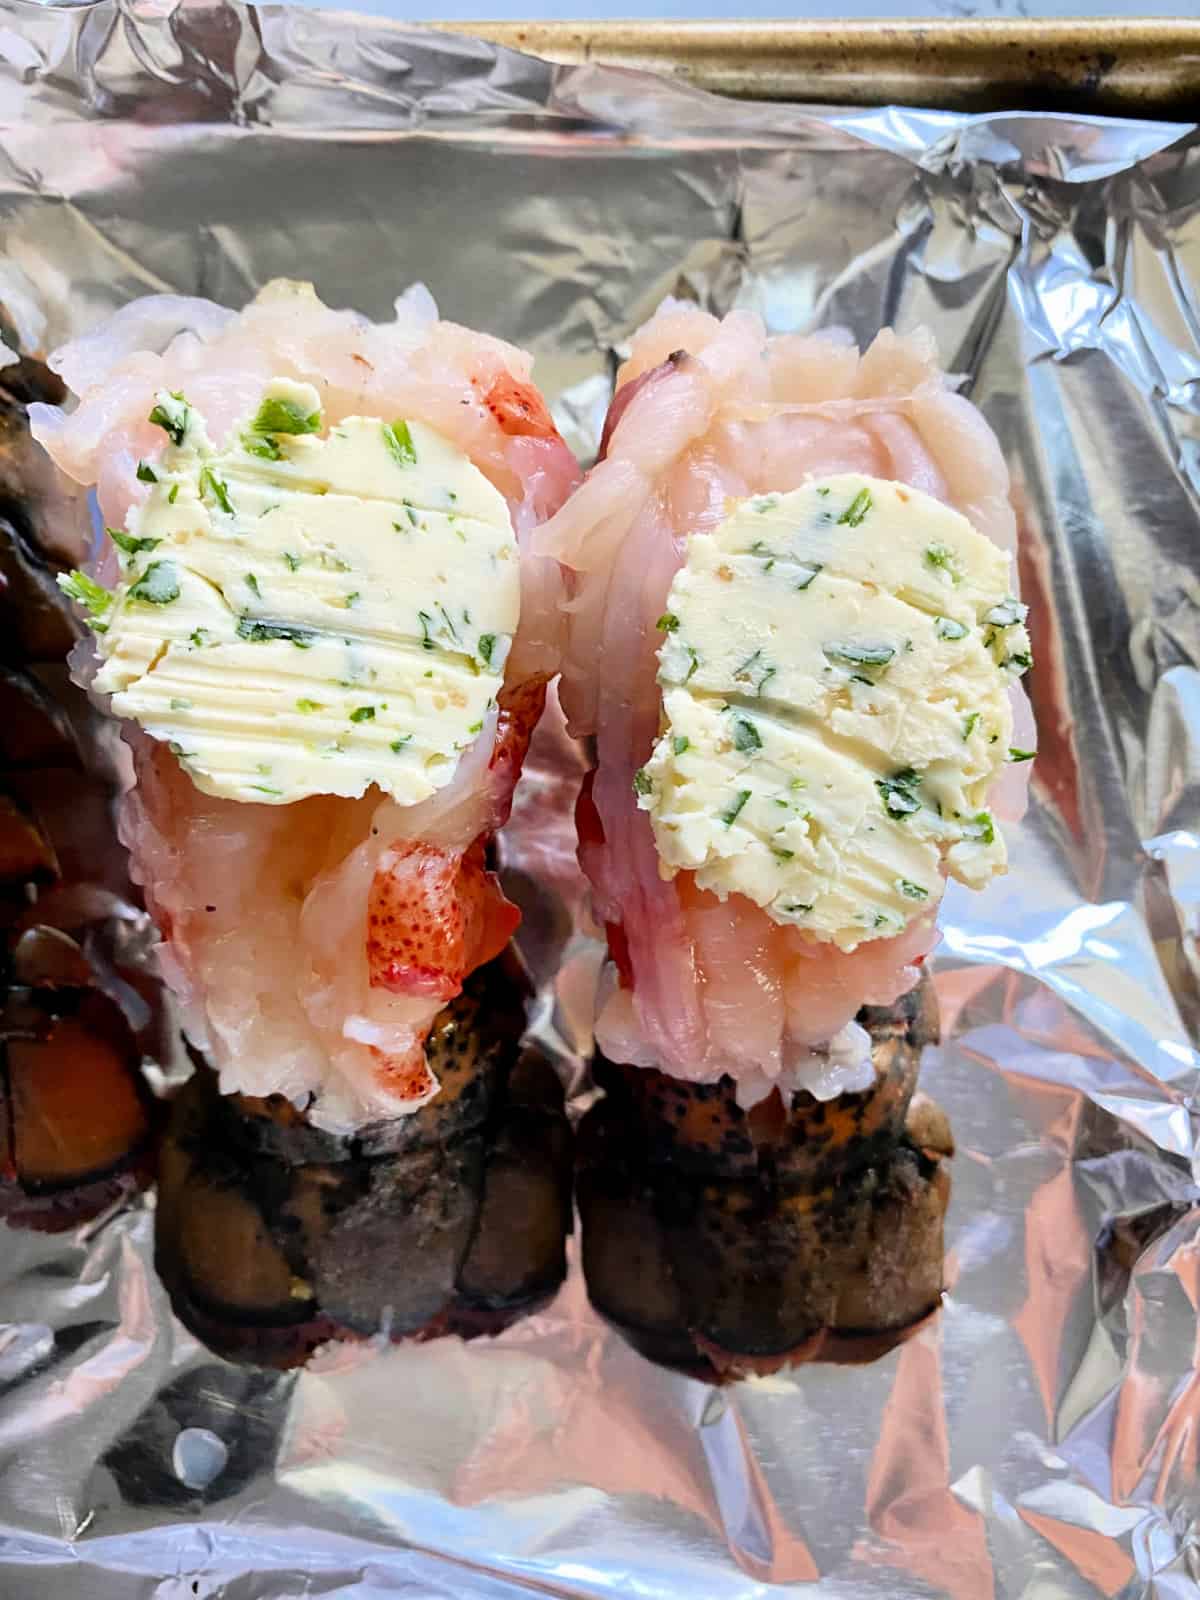 Two lobster tails with herb compound butter on top.